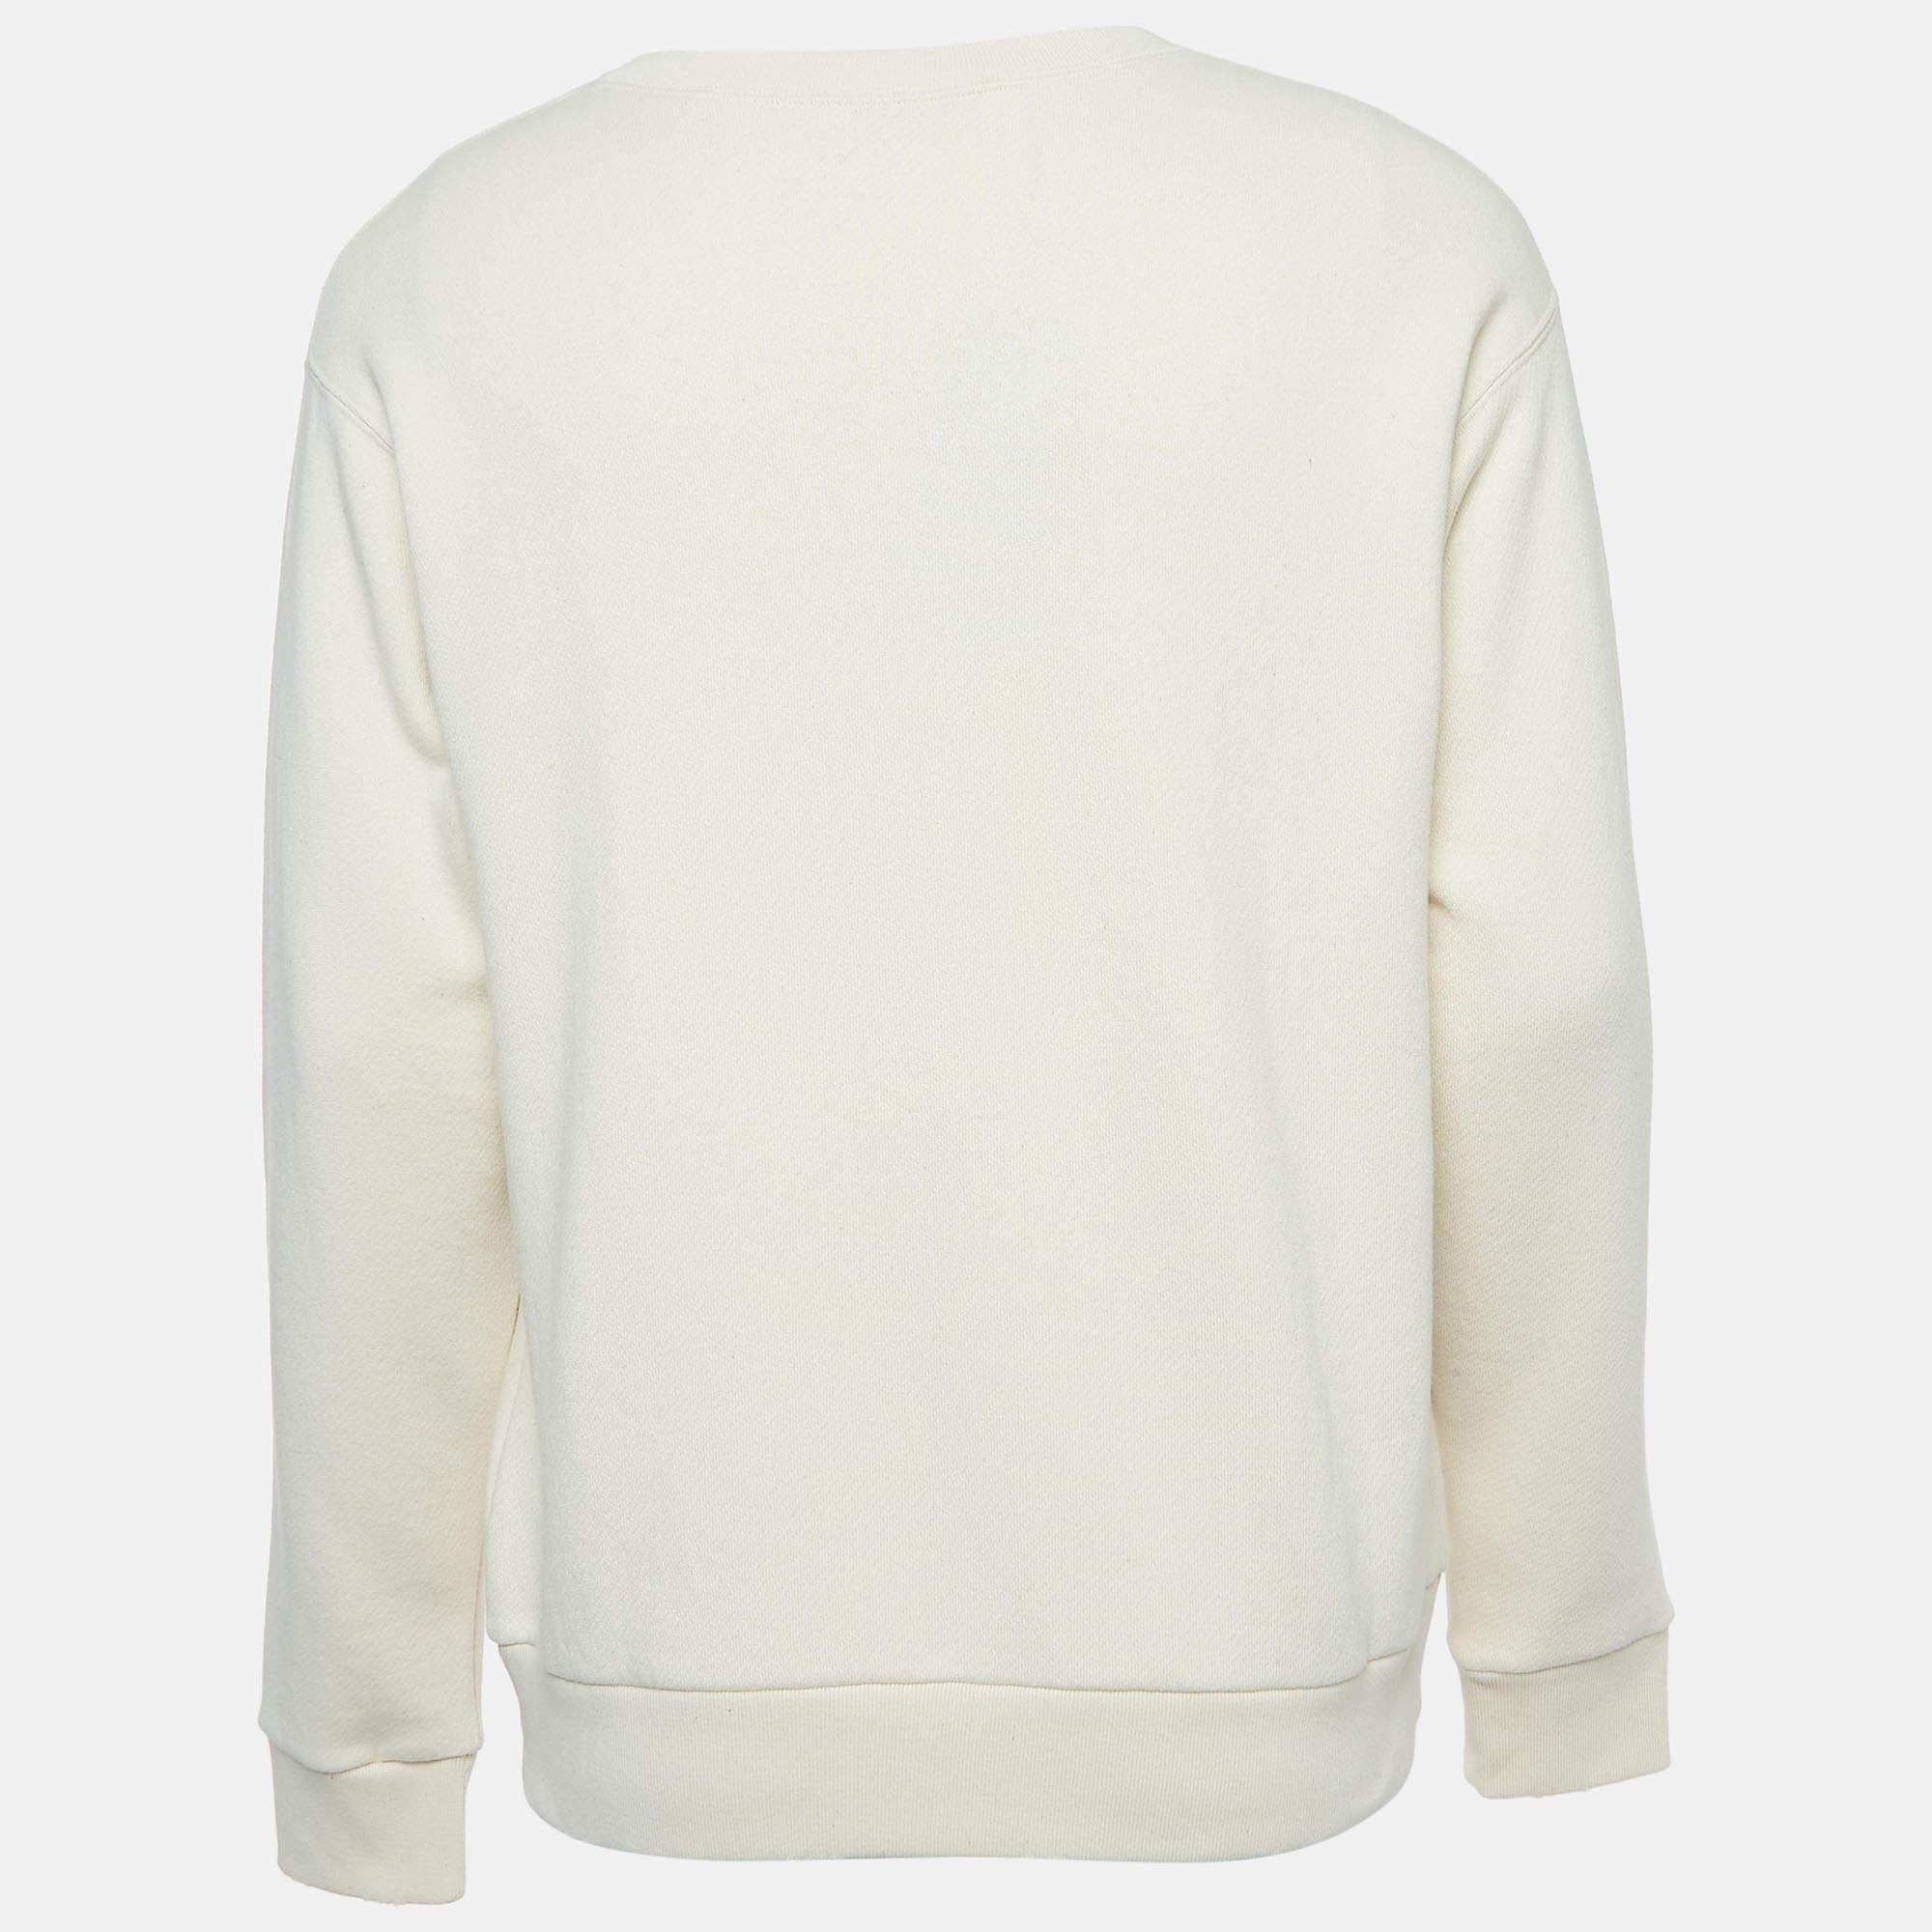 Experience comfort with never-ending style as you don this super-chic sweatshirt from Gucci. This sweatshirt has been designed using high-quality fabric which gives you a comfy fit.

Includes: Brand Tag
